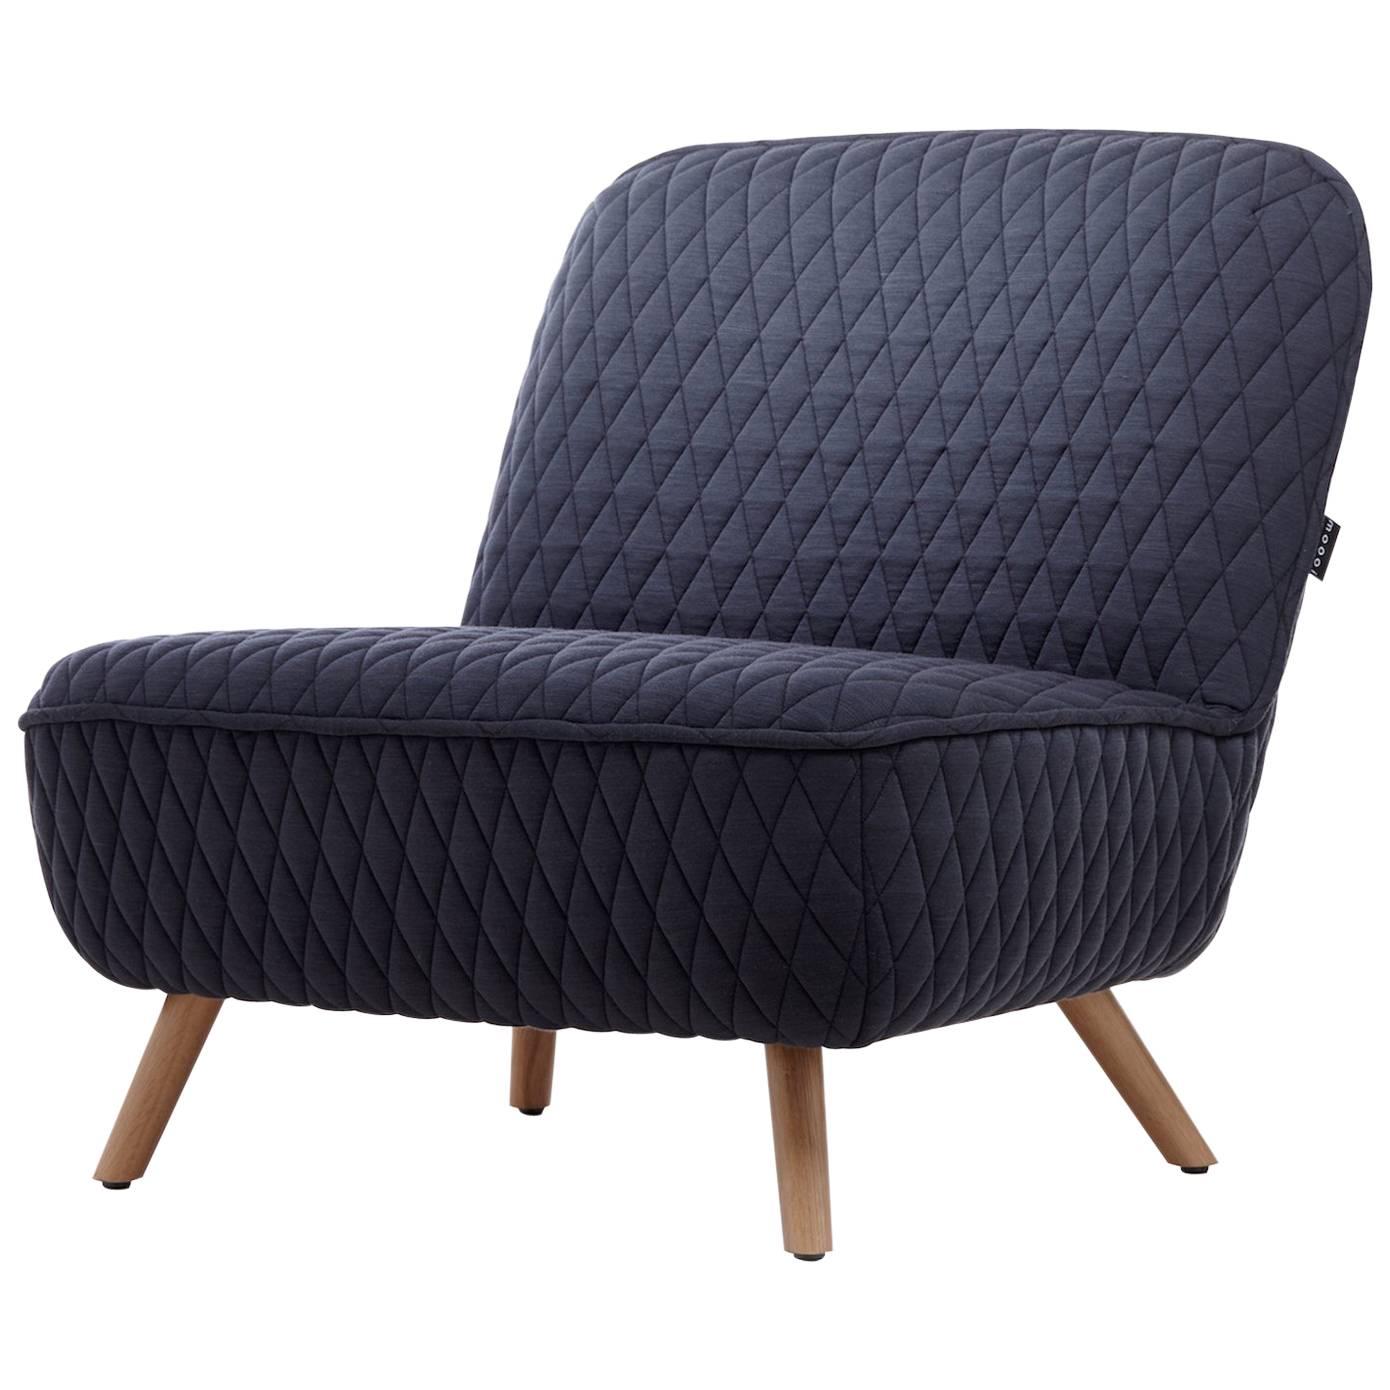 Moooi "Cocktail" Chair by Marcel Wanders with Wooden Legs and Upholstered Body For Sale